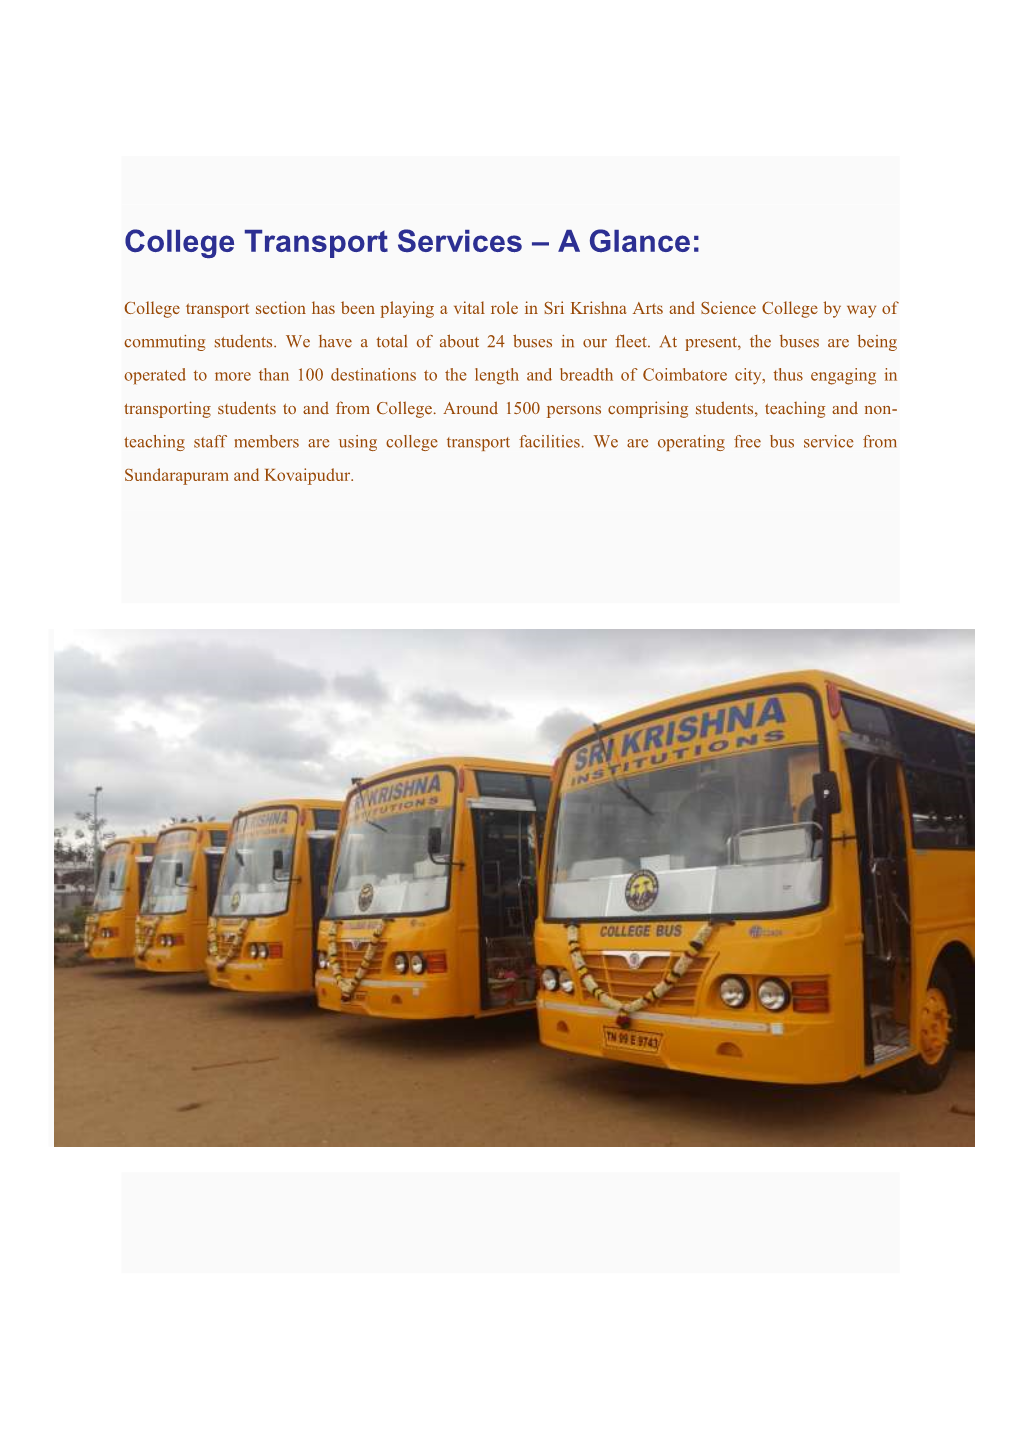 College Transport Services – a Glance